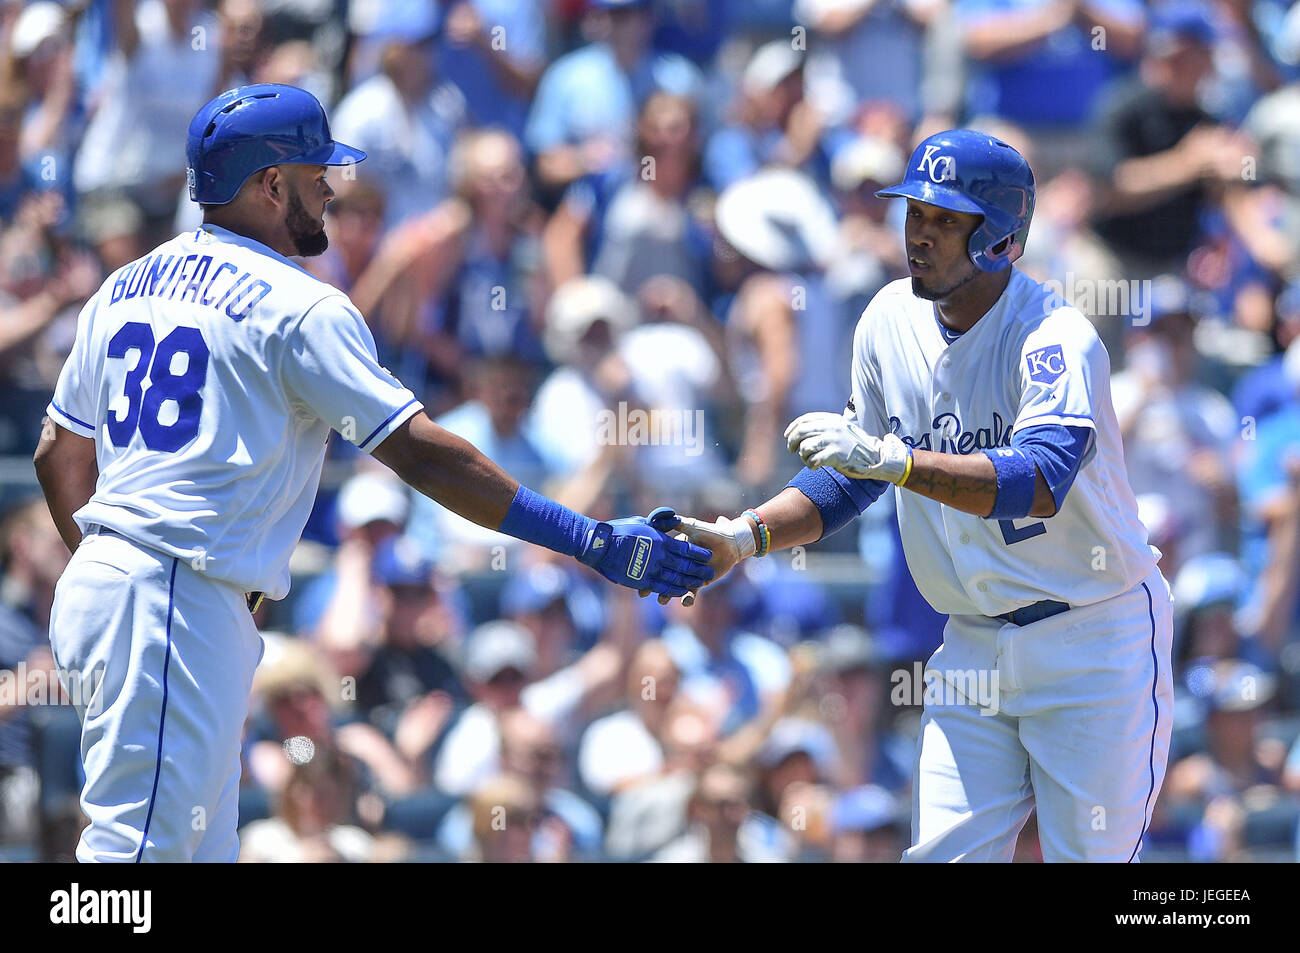 Kansas City, Missouri, USA. 24th June, 2017. Kansas City Royals shortstop Alcides Escobar (2) is congratulated by Kansas City Royals right fielder Jorge Bonifacio (38) after scoring a run in the bottom of the third inning during the Major League Baseball game between the Toronto Blue Jays and the Kansas City Royals at Kauffman Stadium in Kansas City, Missouri. The Royals won the game 3-2. Kendall Shaw/CSM/Alamy Live News Stock Photo